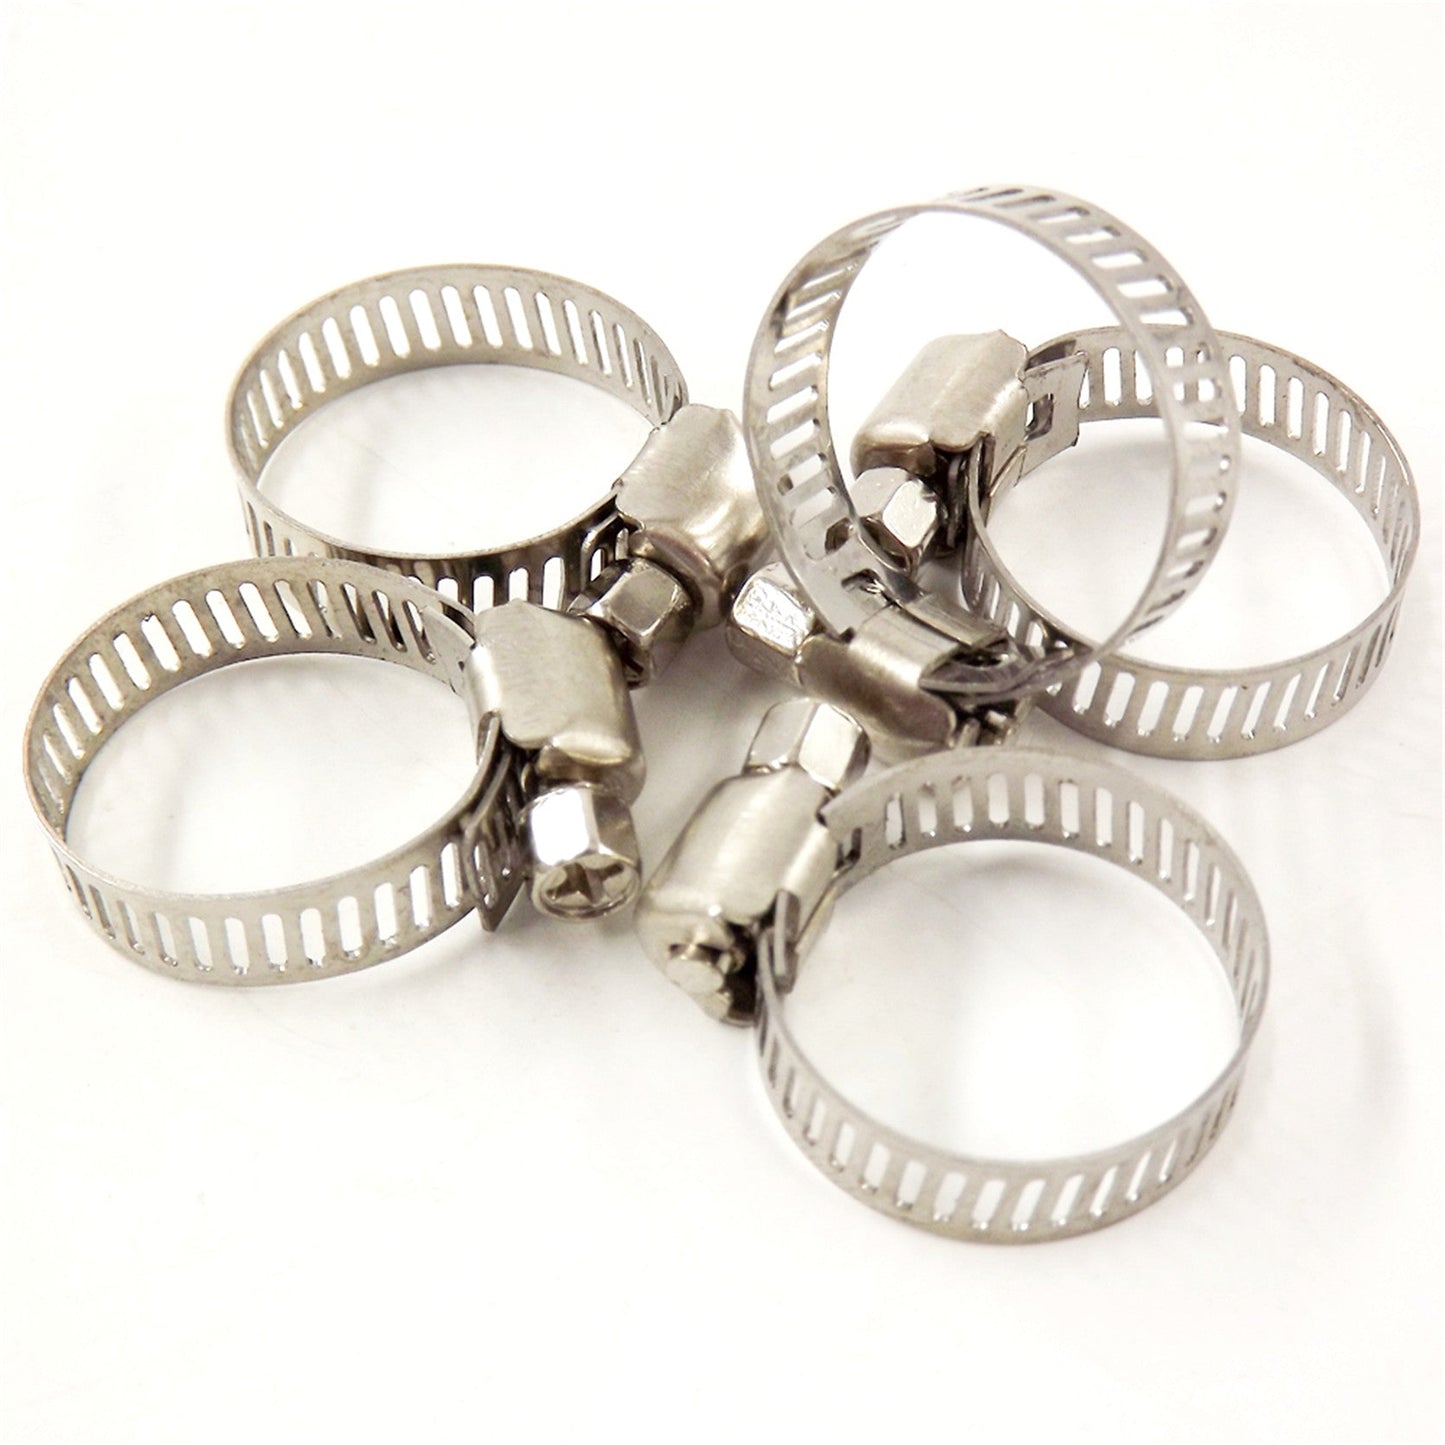 100Pcs 1/2"-3/4" Adjustable Drive Hose Clamps Fuel Line Worm Stainless Steel FINDMALLPARTS